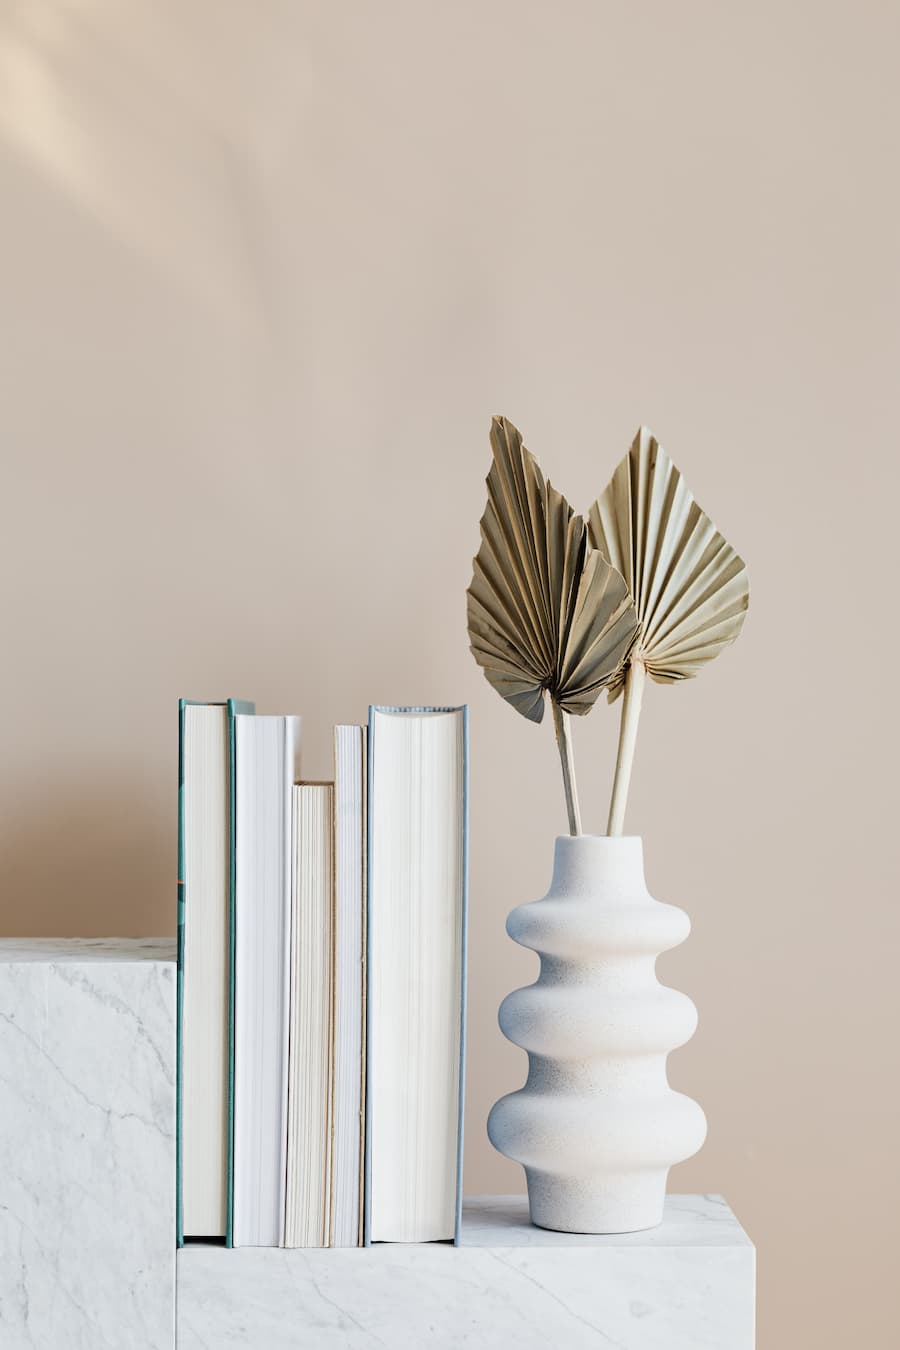 Simple set up of 5 books in varying widths showing the pages rather than the spine of the book alongside a white ribbed vase with two dried ferns inside